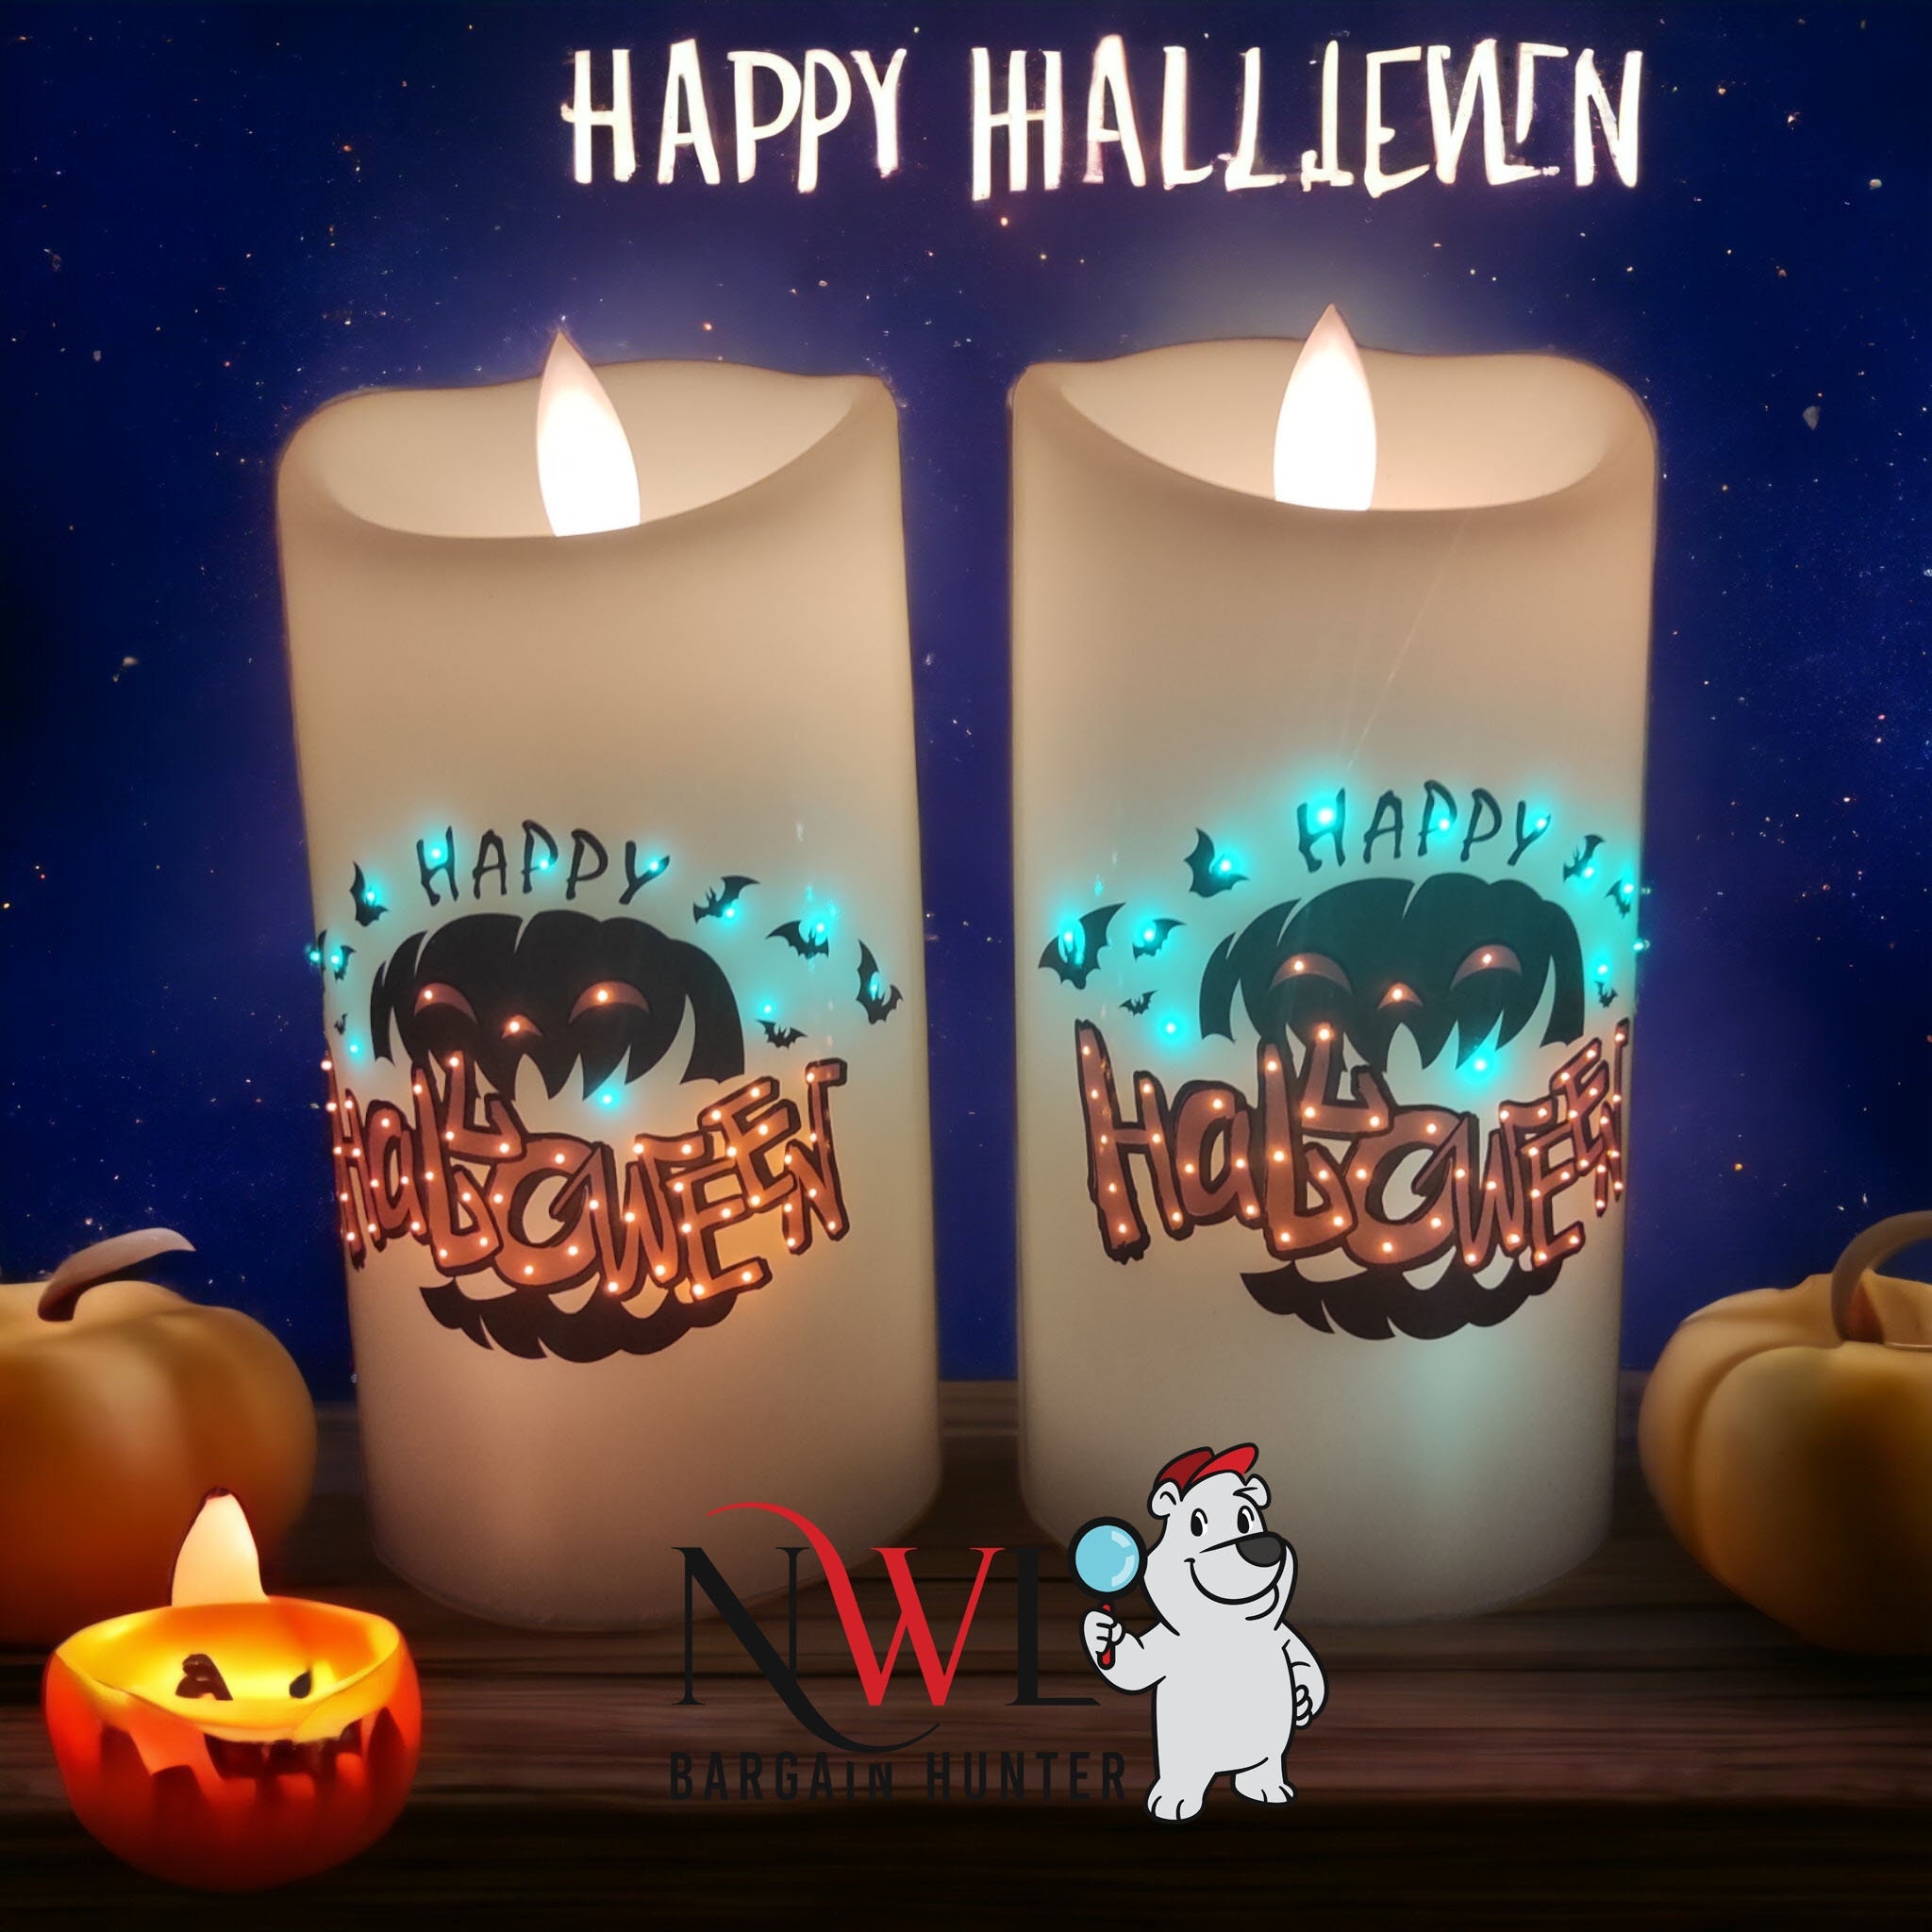 Halloween Decorations -12 Floating LED Candles with Remote Control - Witch Halloween Harry Potter Decor Christmas Party Supplies Birthday Wedding Home